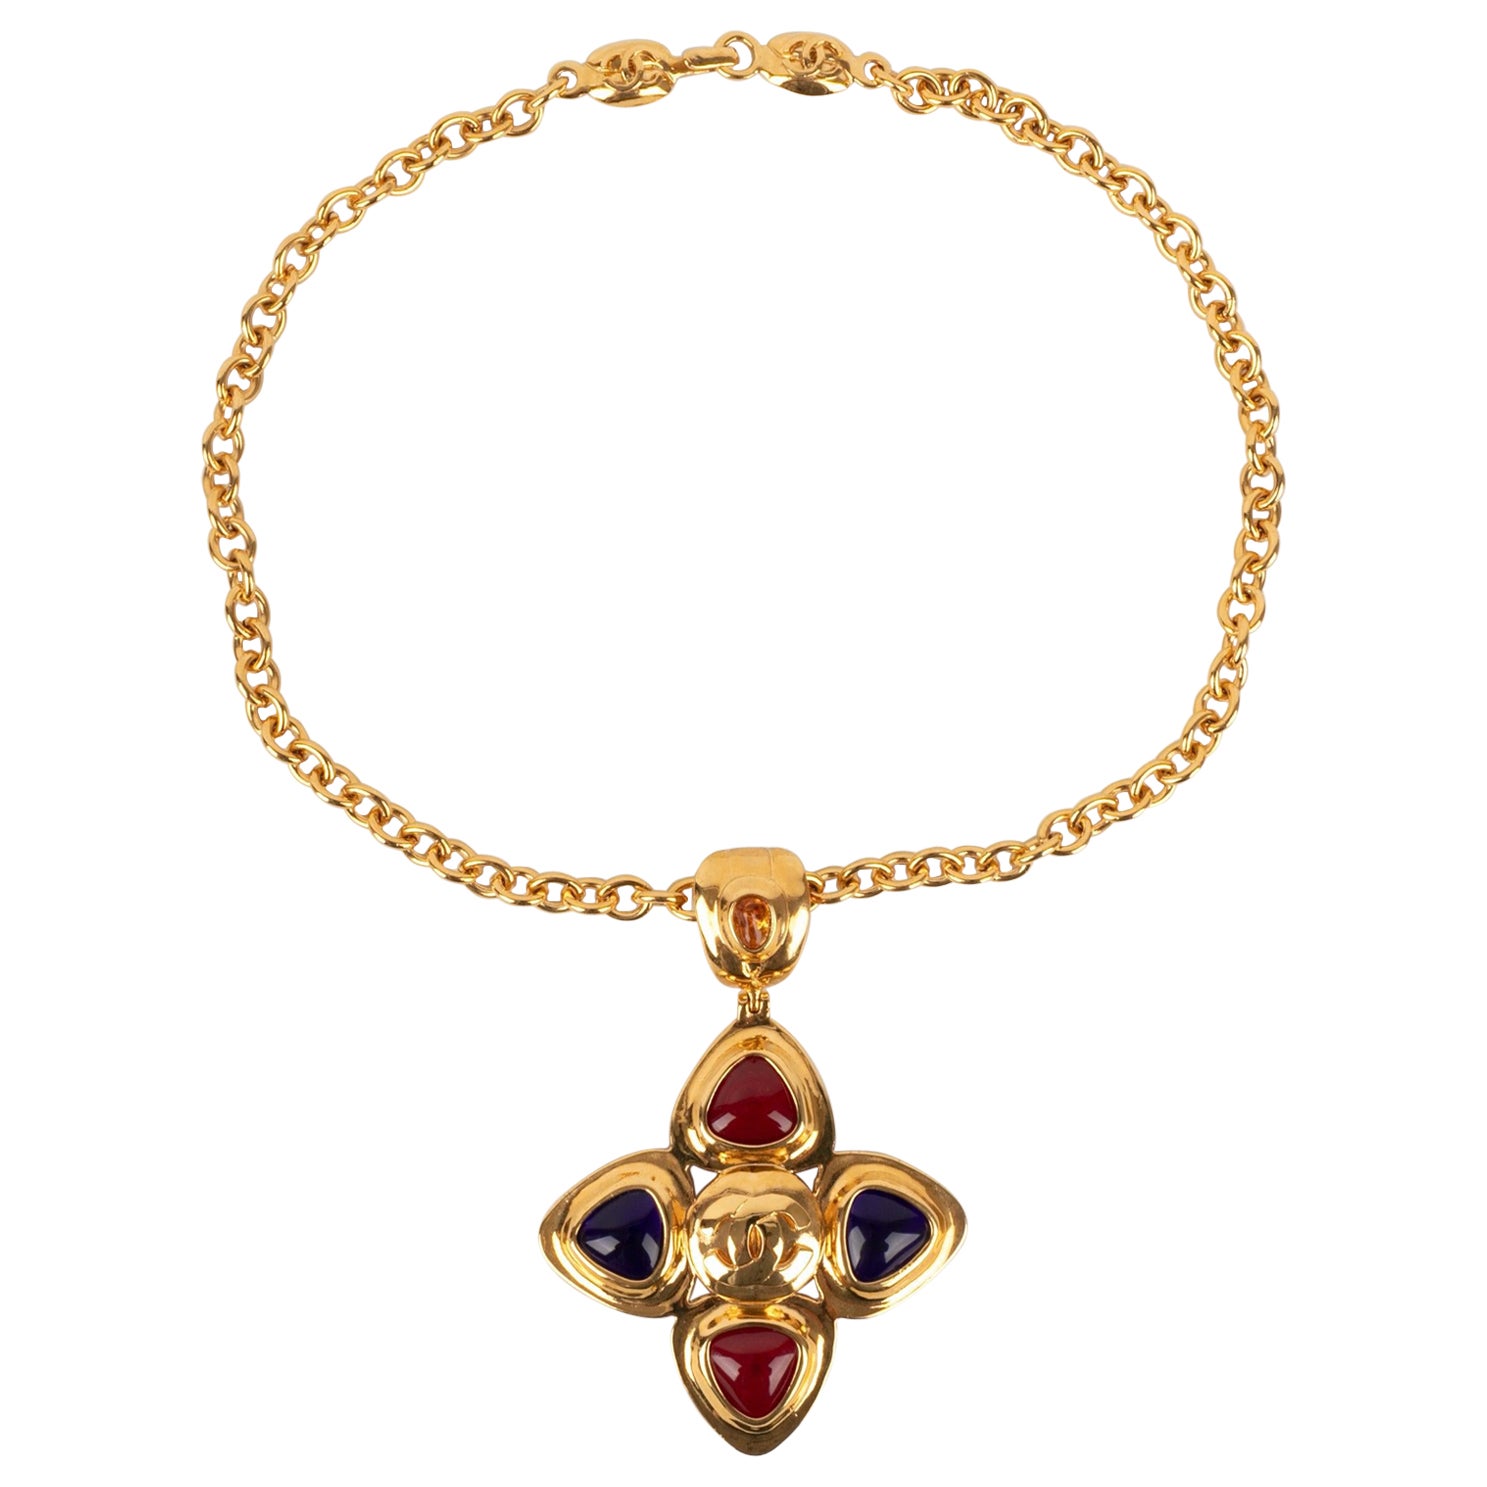 Chanel Golden Metal Necklace with a Blue and Red Glass Paste Pendant, 1997